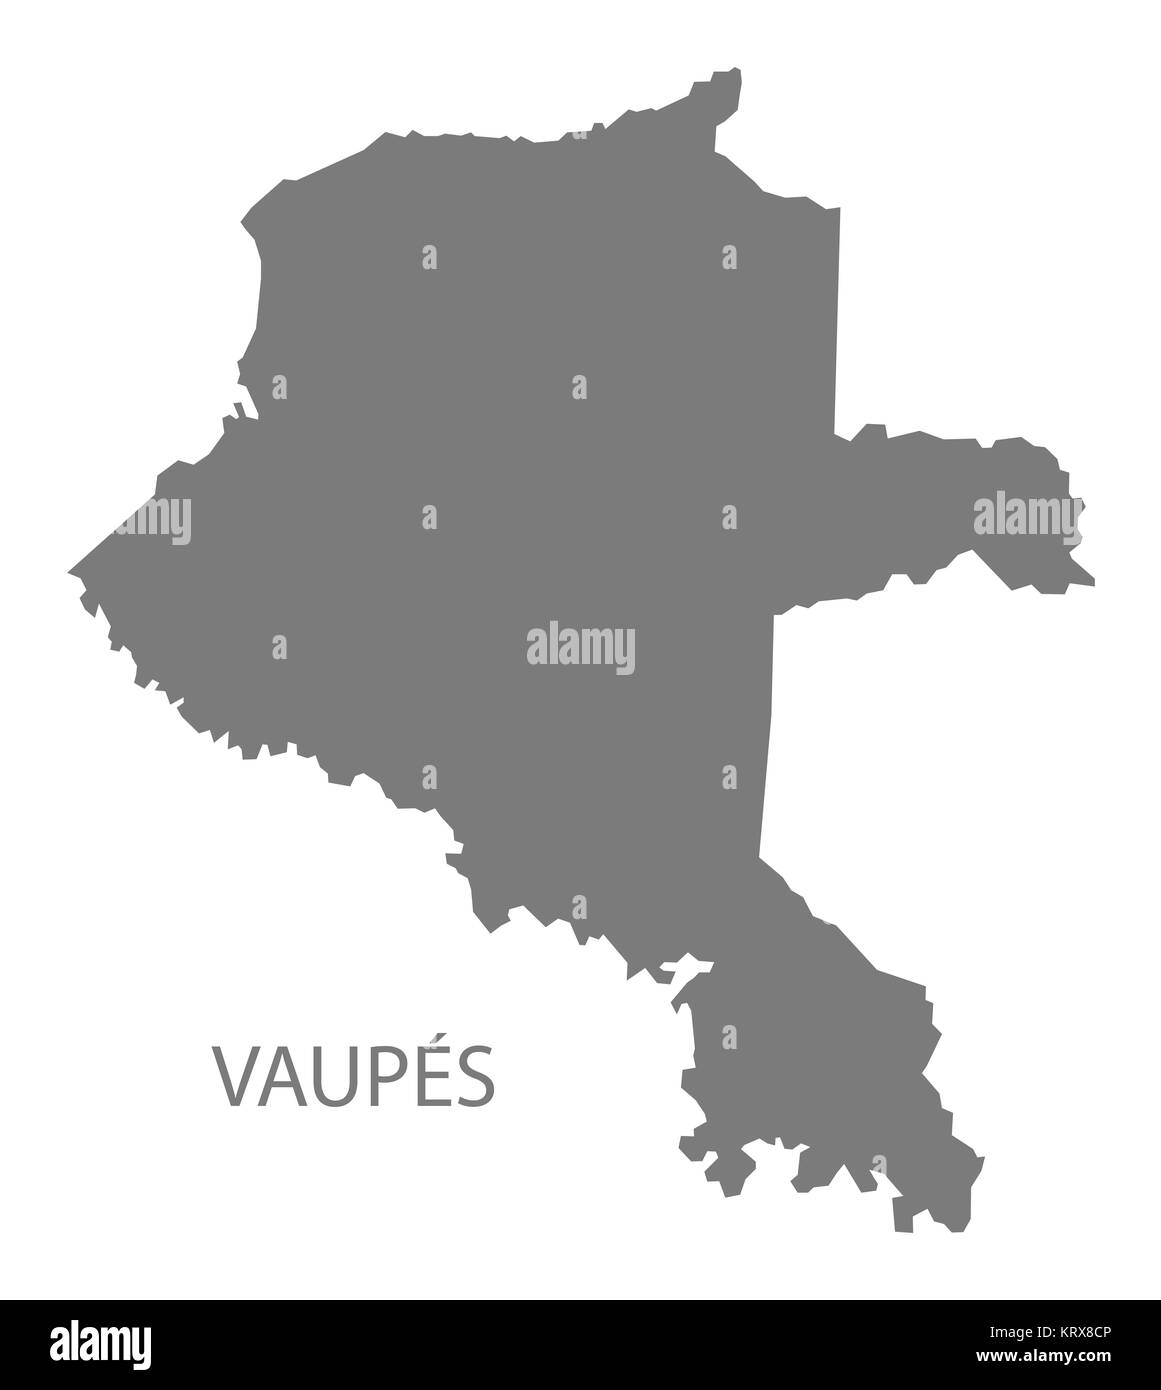 Vaupes Colombia Map in grey Stock Photo